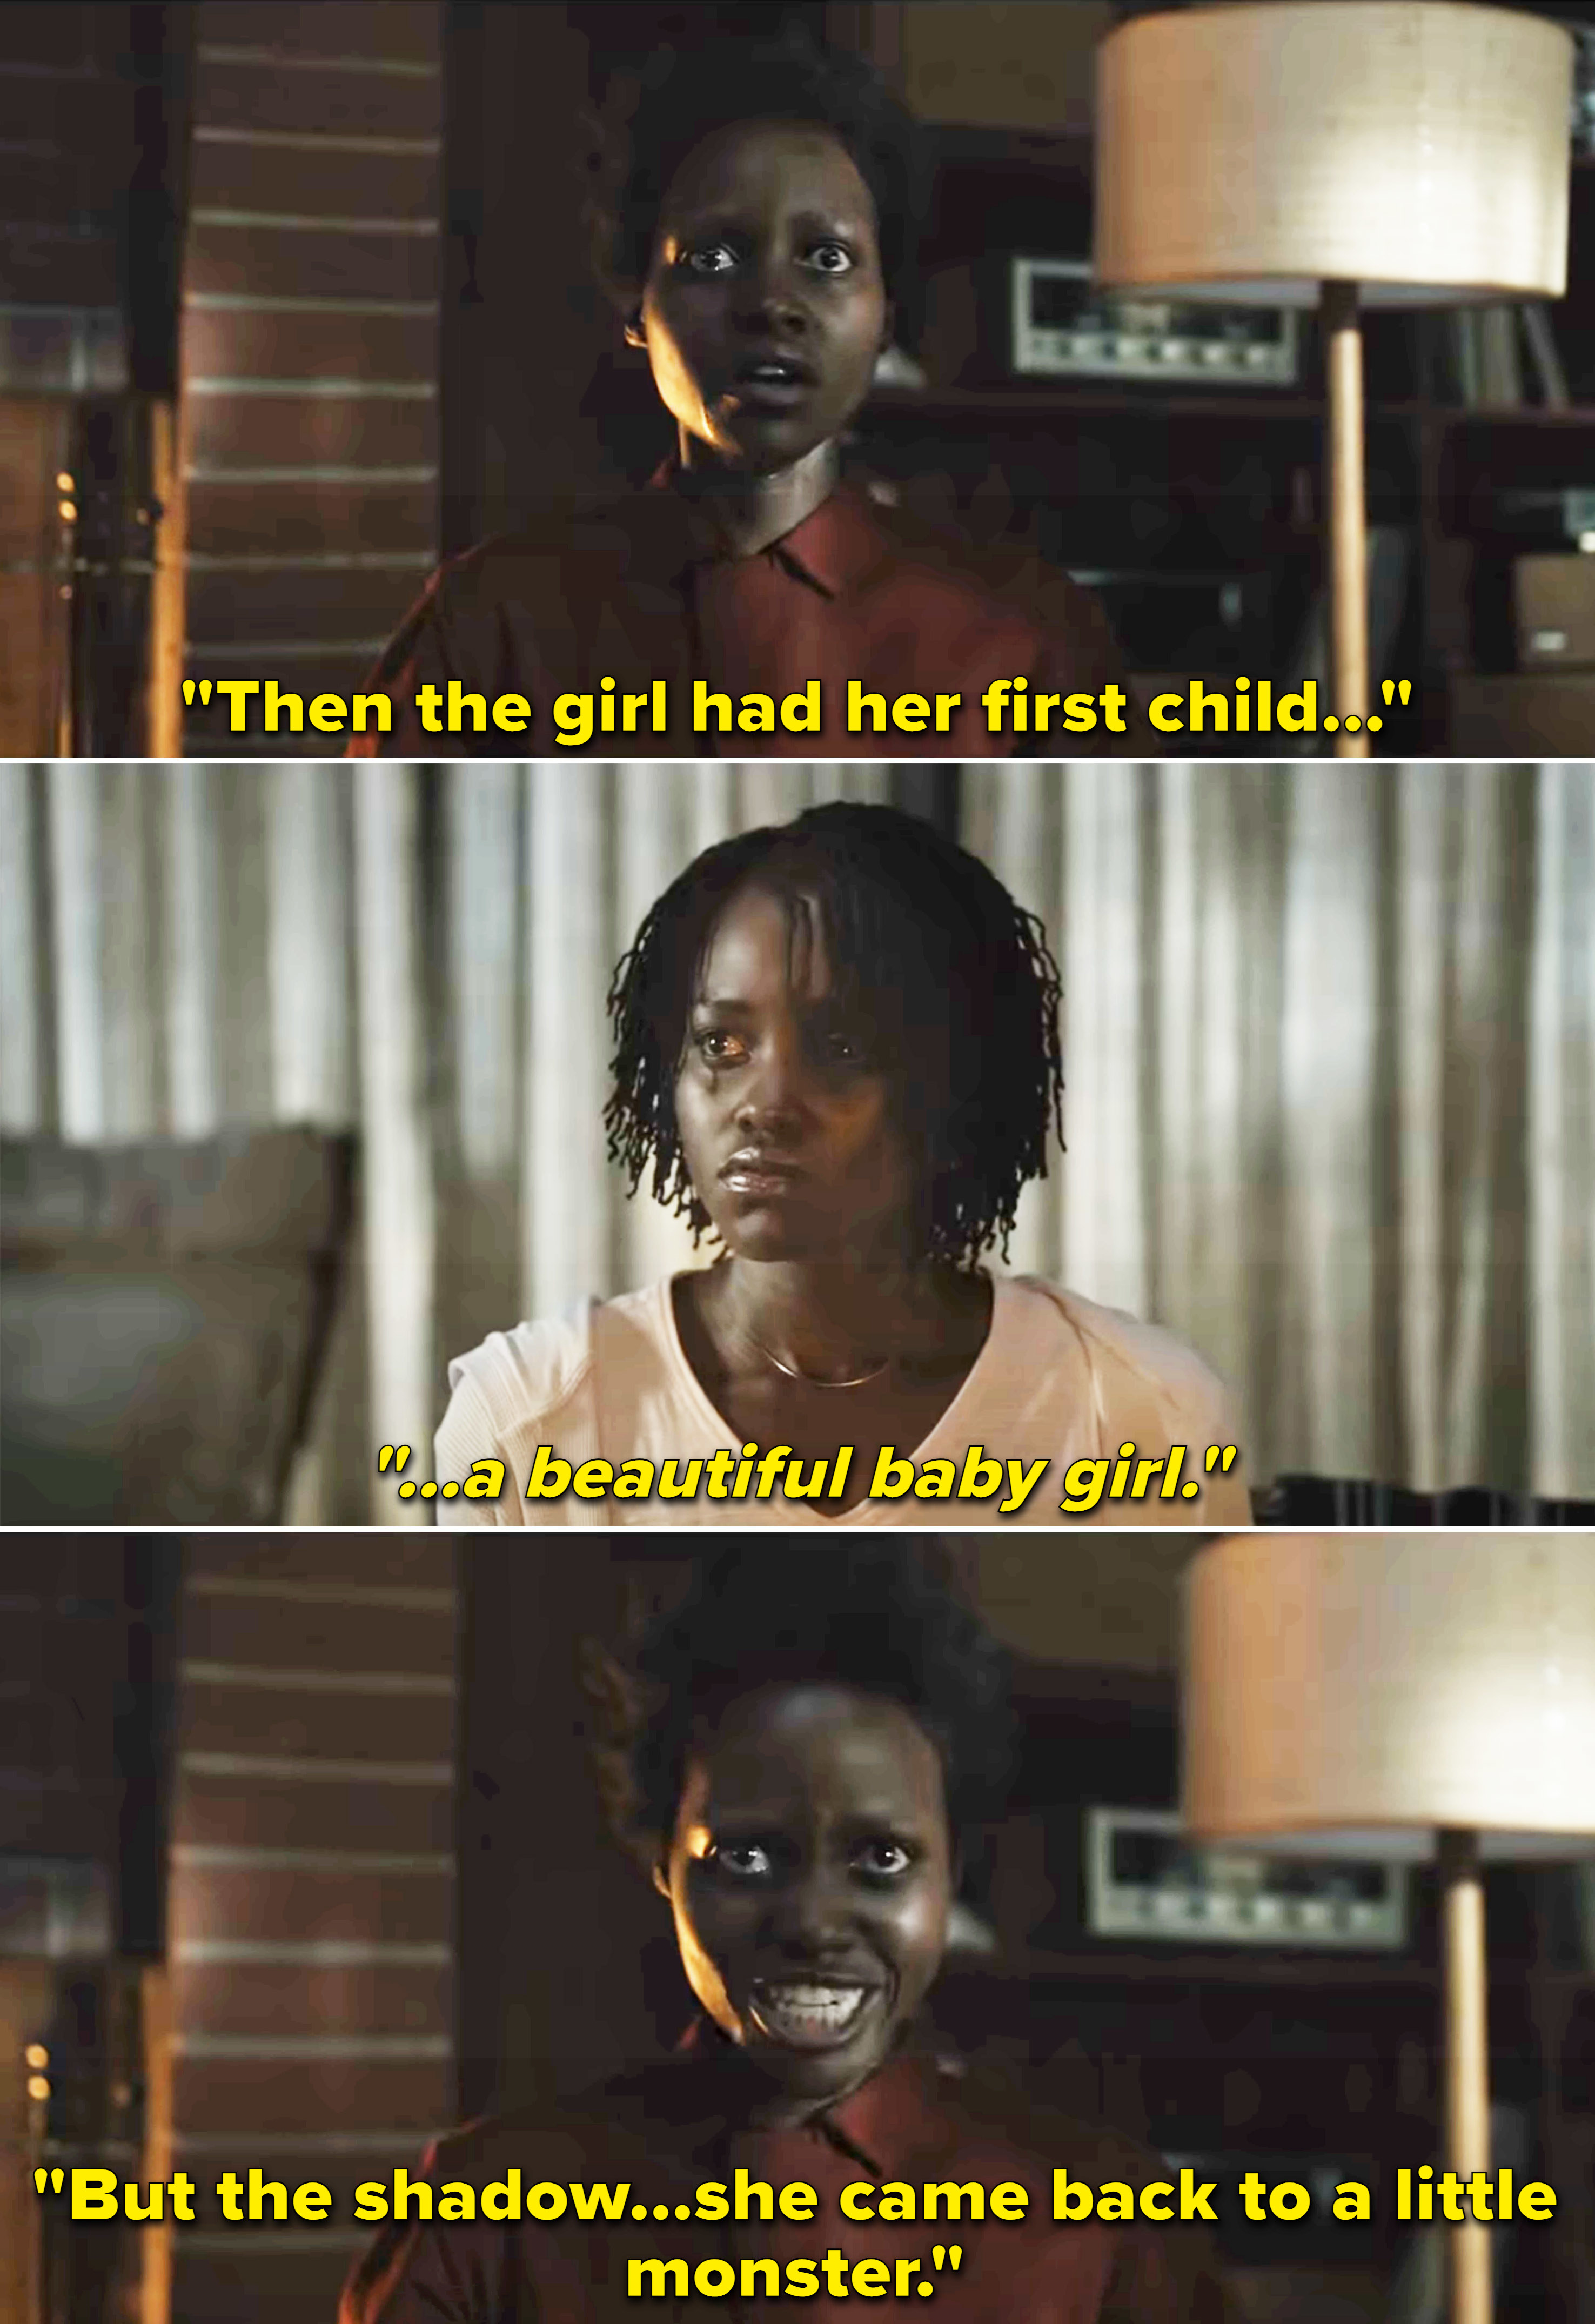 Lupita in a scene saying that a baby girl came back to a little monster